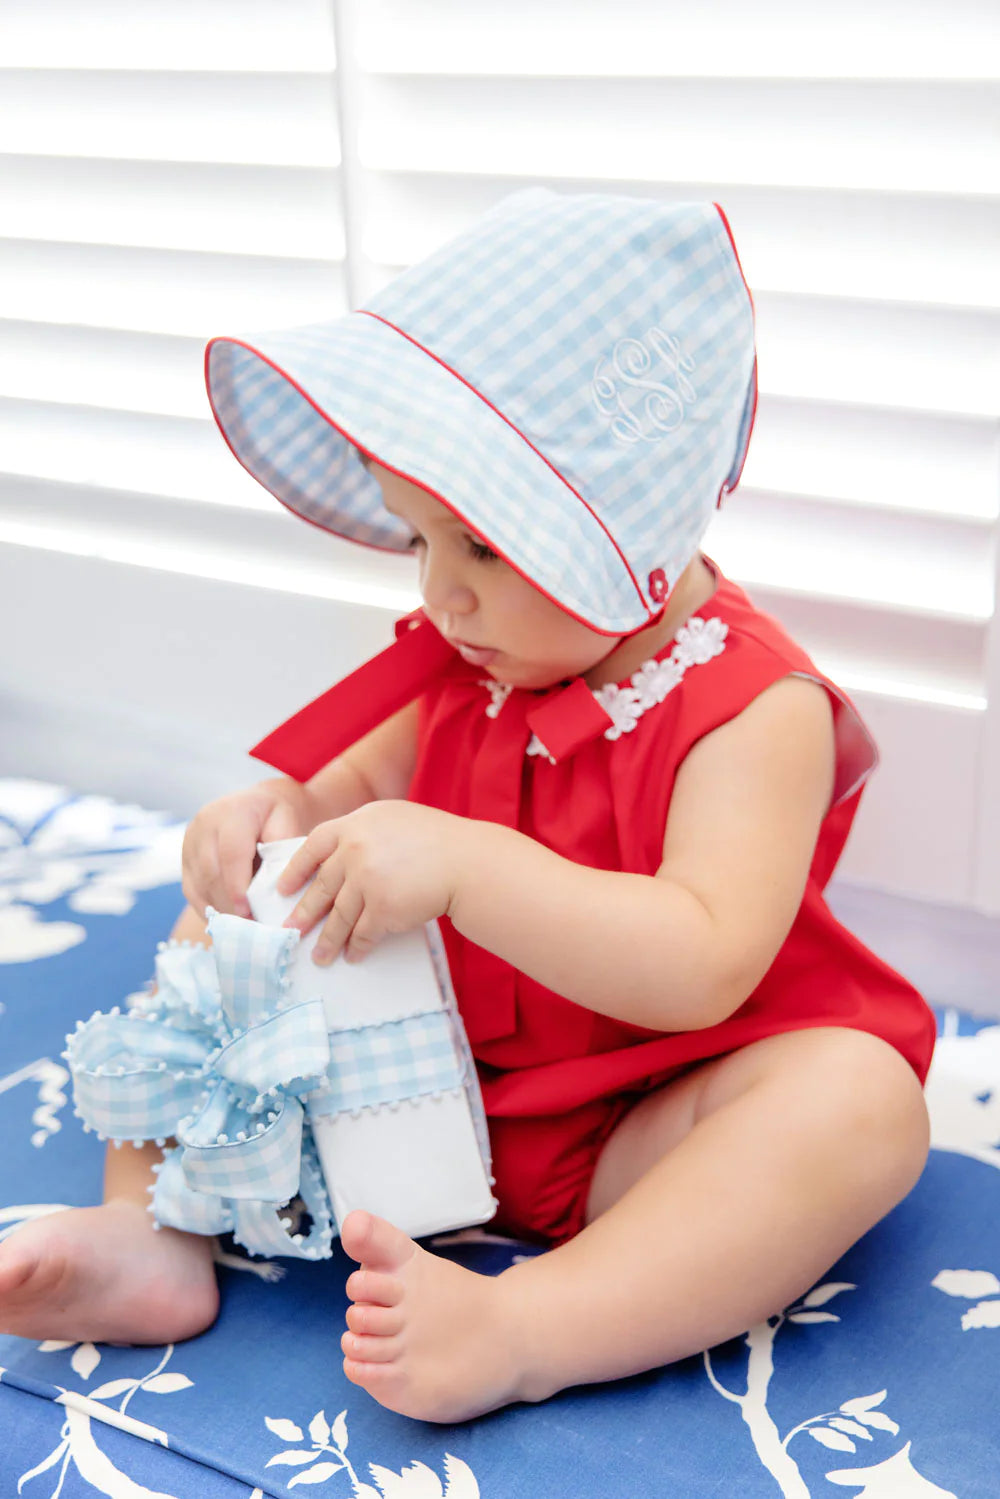 Buckhead Blue Gingham with Richmond Red Catesby Country Club Bonnet